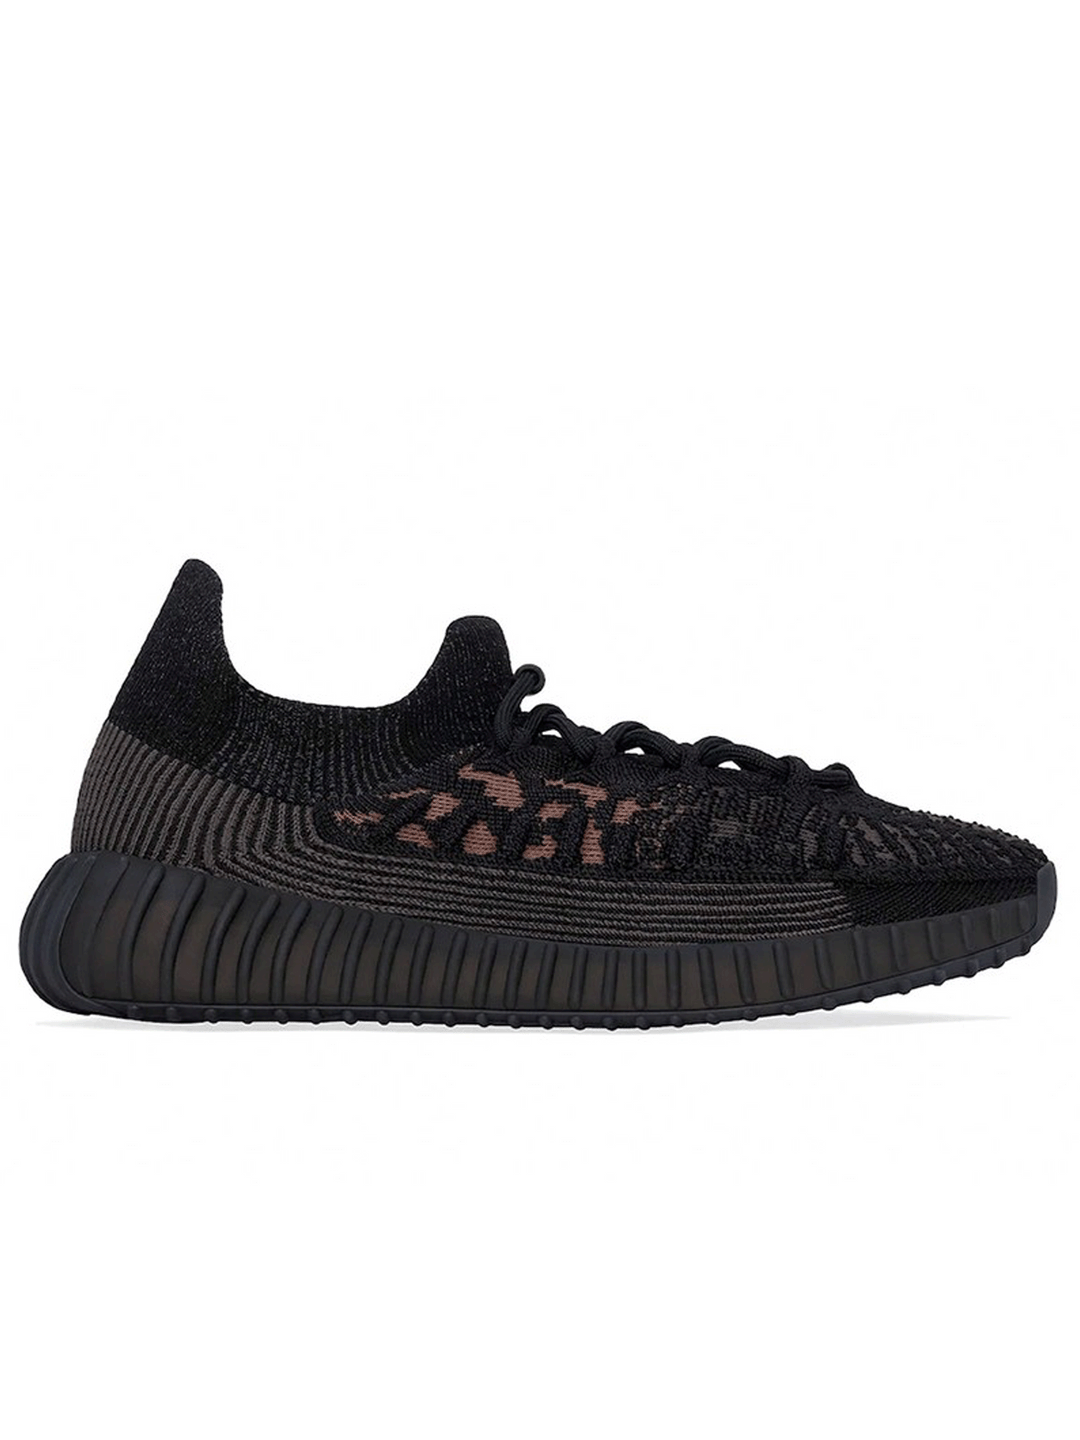 Adidas Yeezy Boost 350 V2 CMPCT Slate Carbon Prior